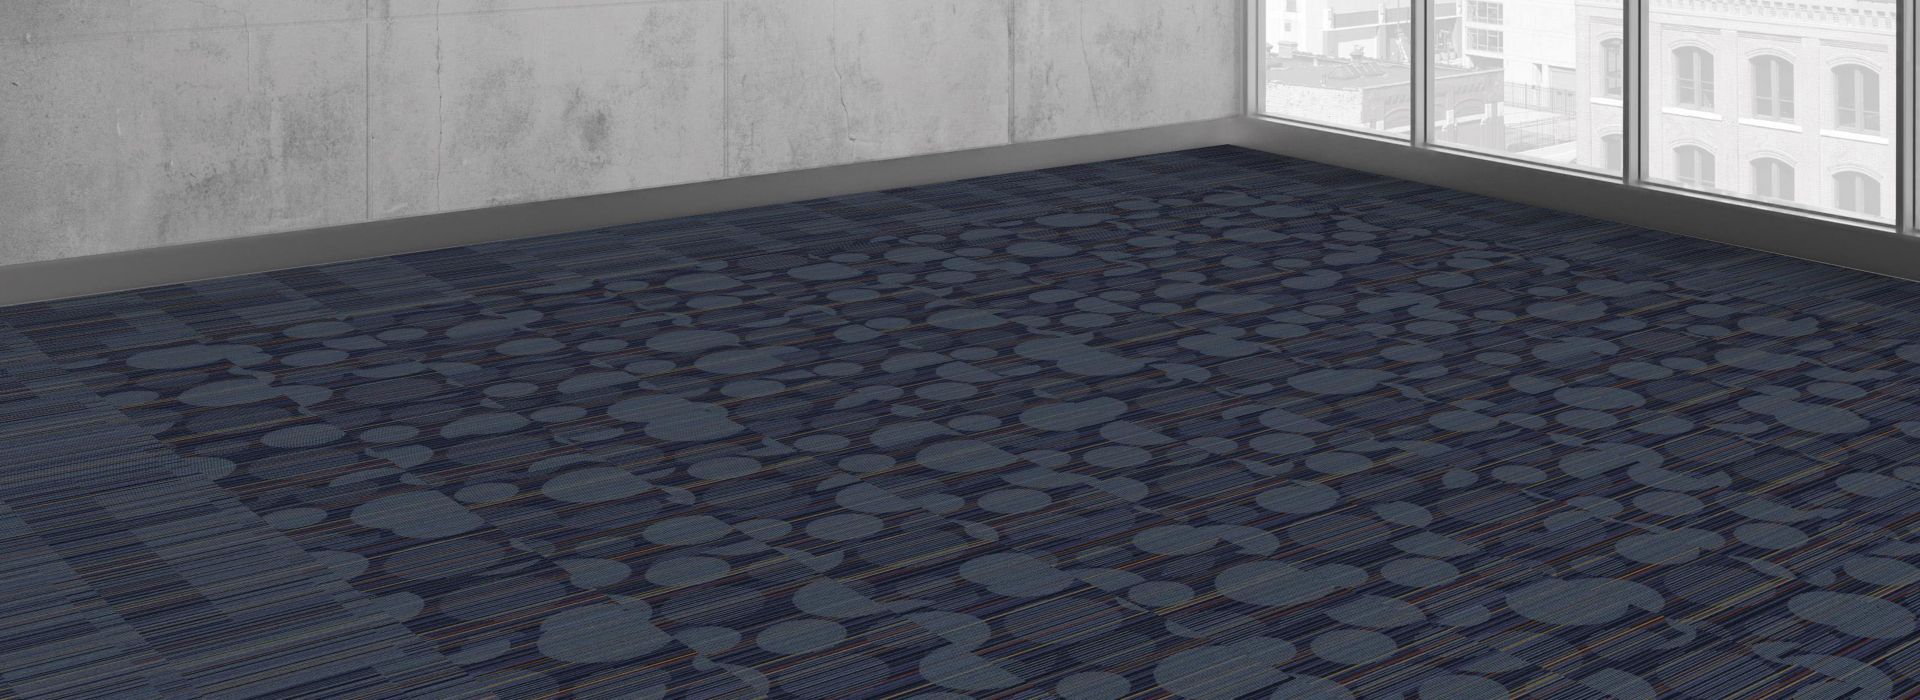 Interface Extra Curricular and Student Council carpet tile in open area with concrete walls